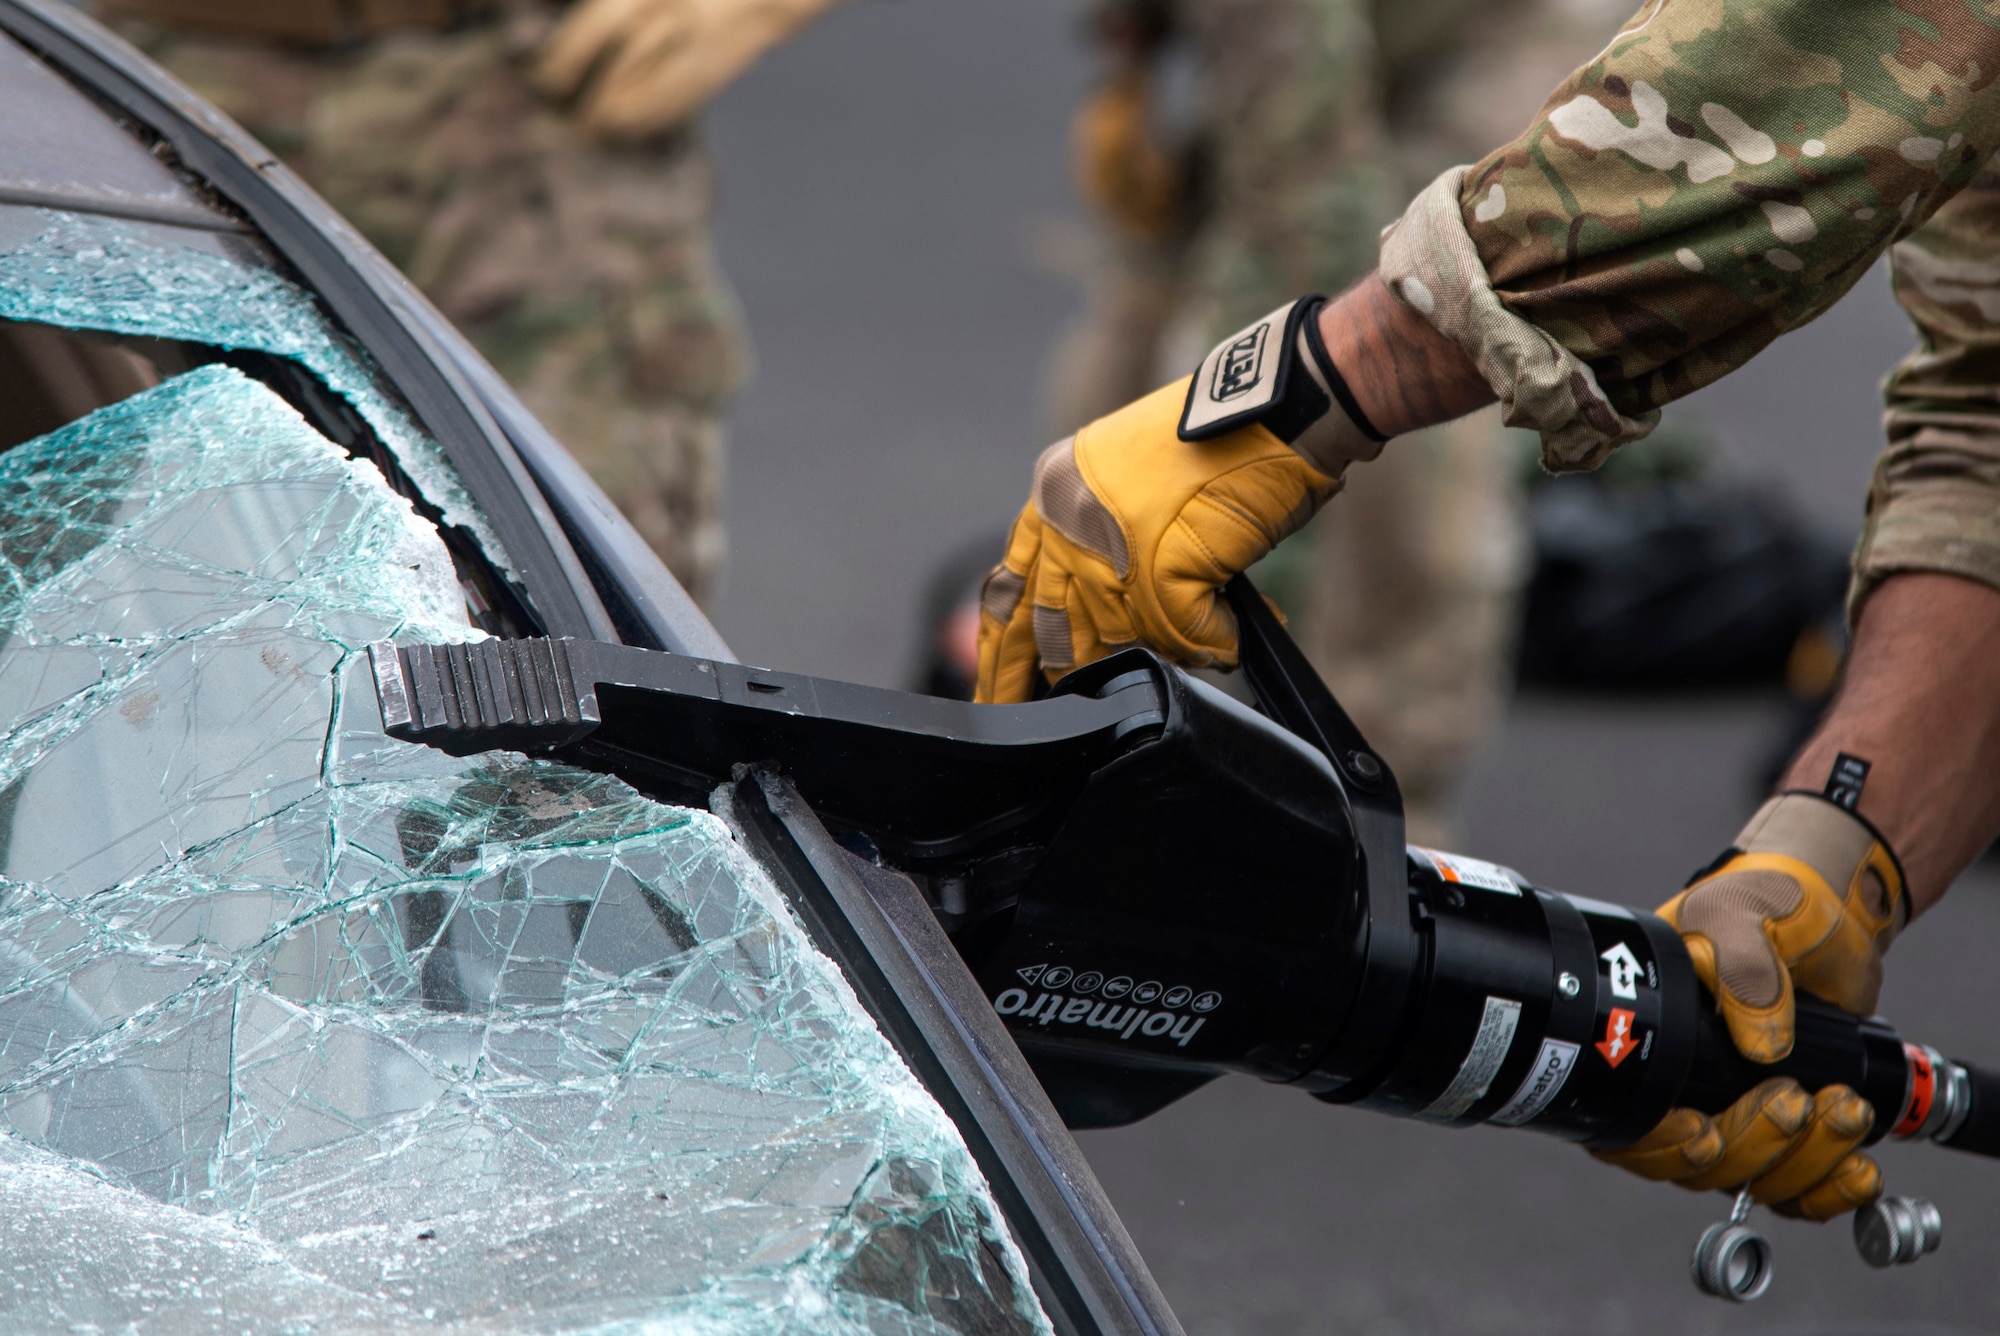 An Oregon Air National Guardsman from the 125th Special Tactics Squadron, uses a tool called the “jaws of life” to conduct extrication training at Portland Air National Guard Base, Portland, Ore., Oct. 8, 2020, to simulate removing trapped personnel from a car or aircraft. The training allowed members to utilize specialty tools in a controlled environment. (U.S. Air National Guard photo by Senior Airman Valerie R. Seelye)